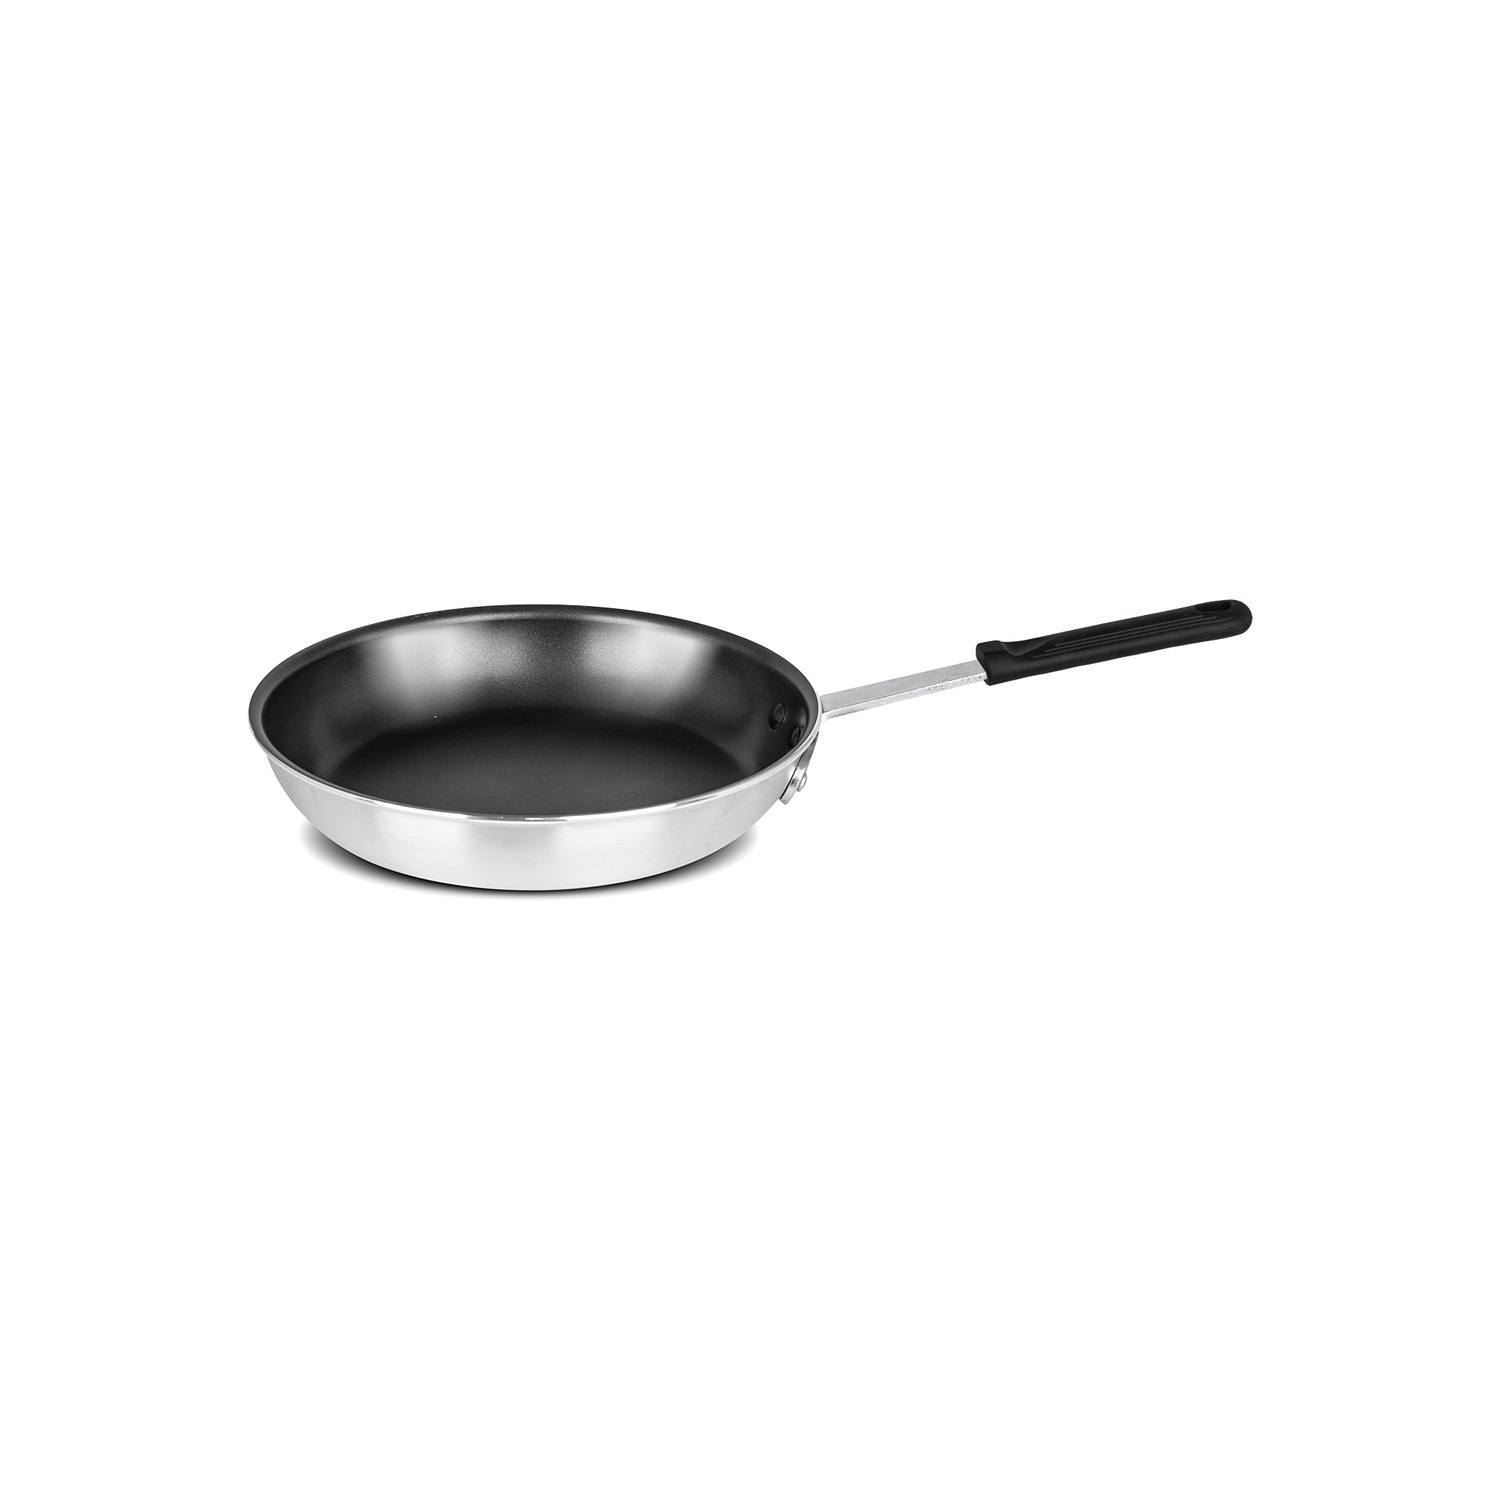 CAC China A4FP-8NL Non-Stick Aluminum Fry Pan with Sleeve 8"